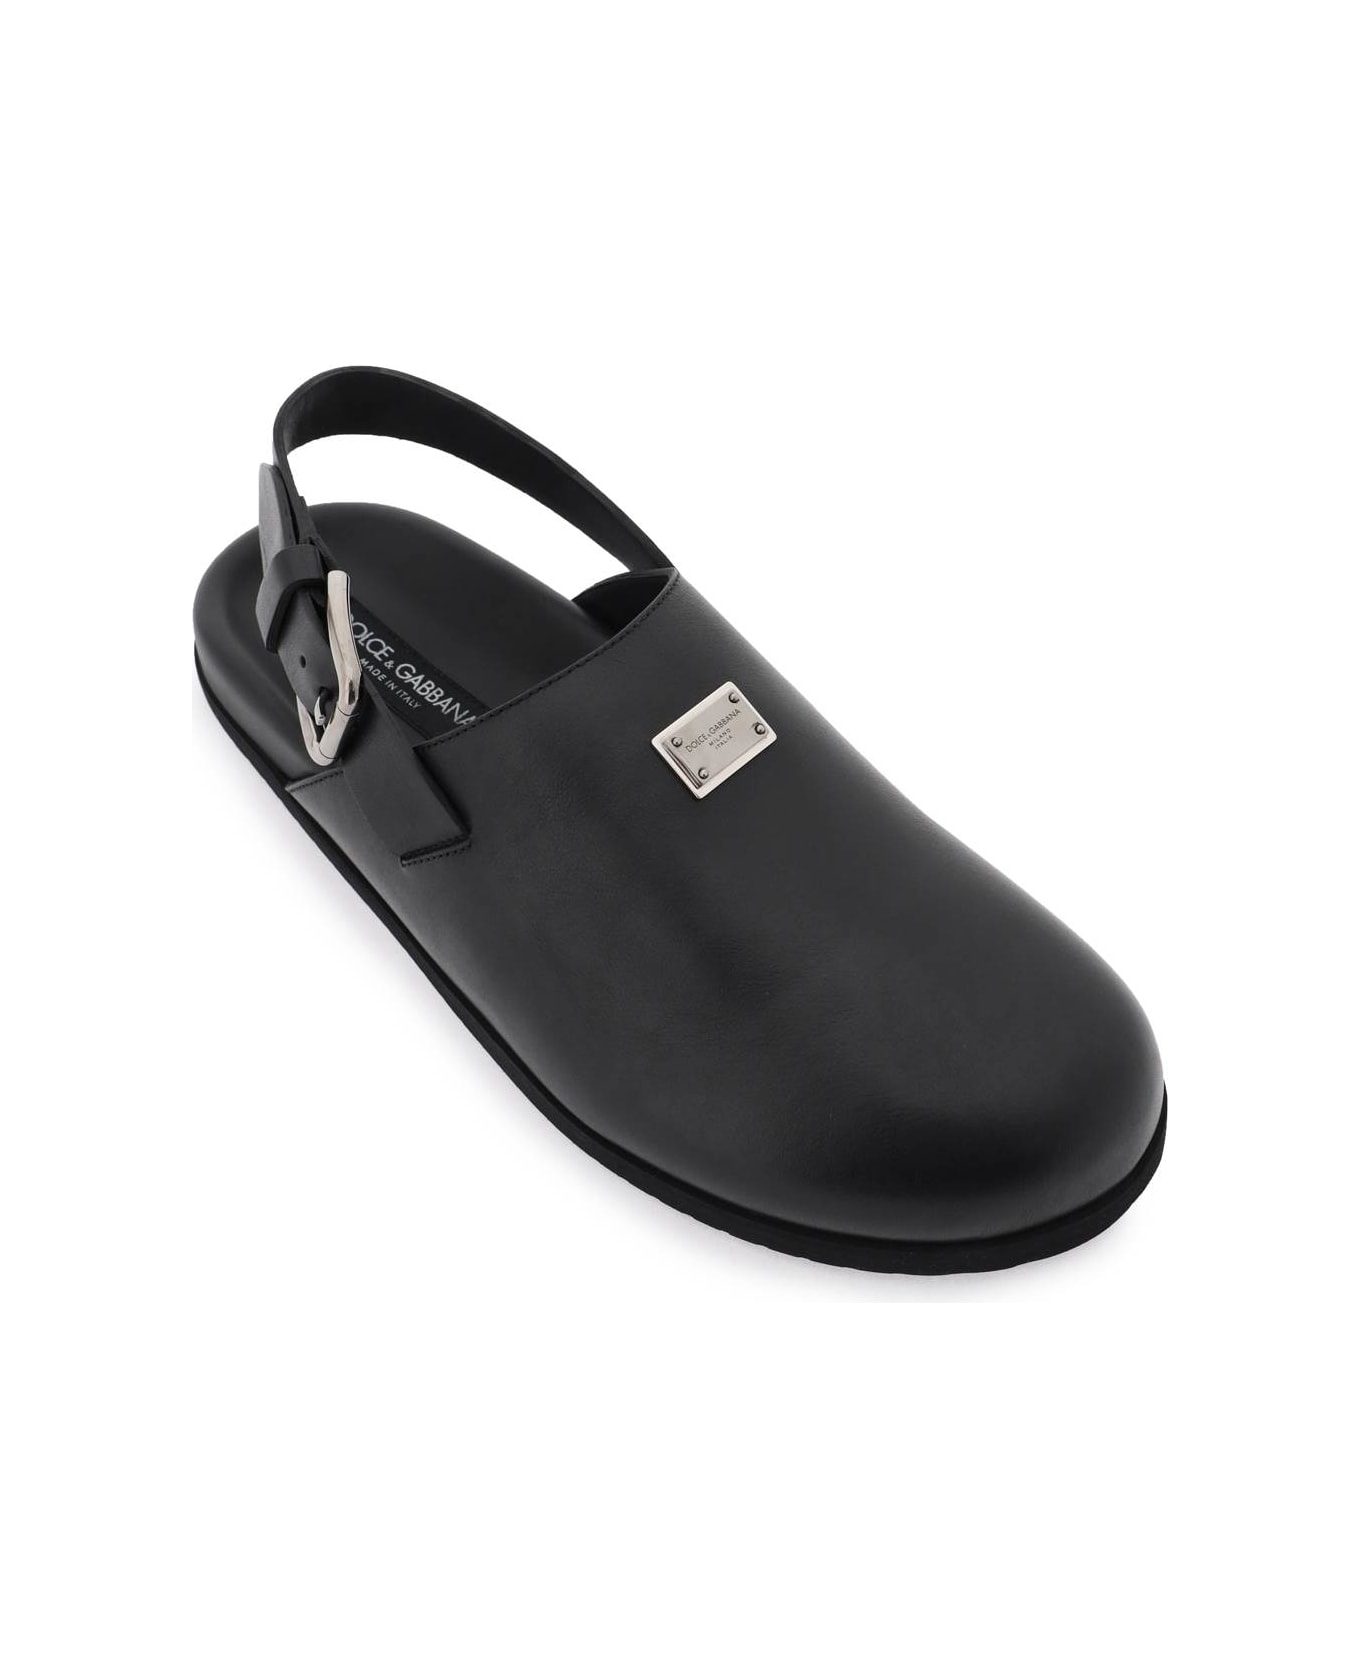 Dolce & Gabbana Leather Clogs With Buckle - black ローファー＆デッキシューズ